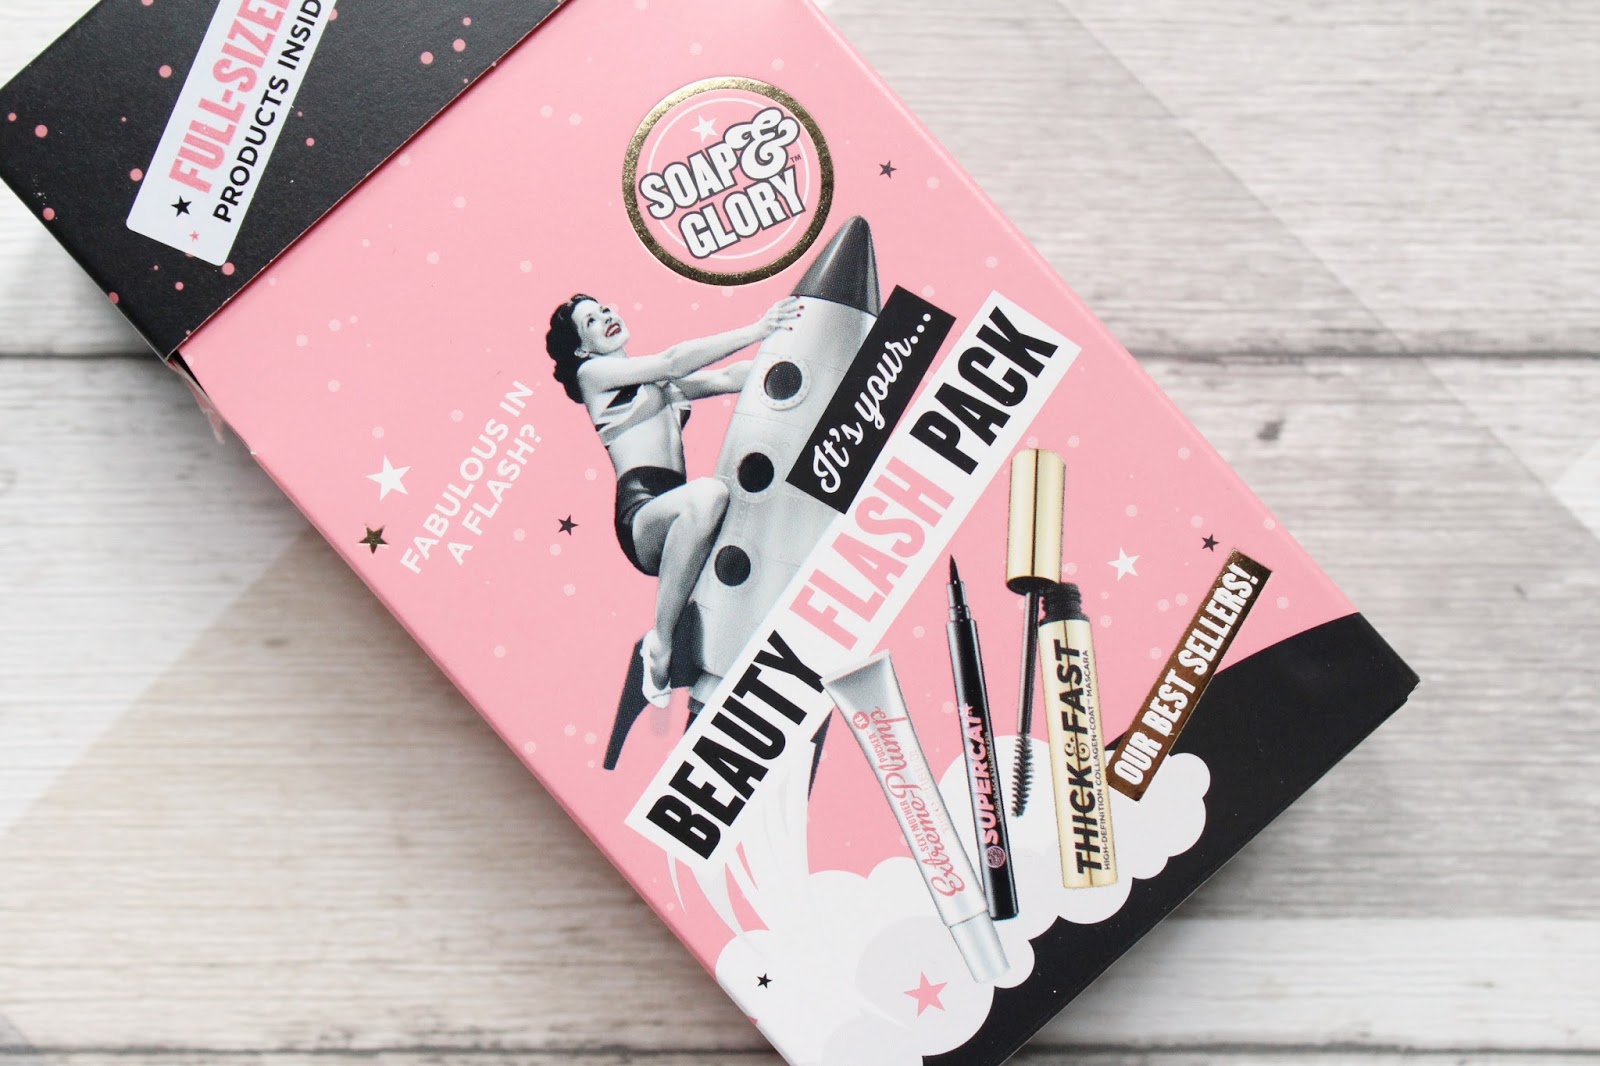 Soap and Glory Gift with Purchase 